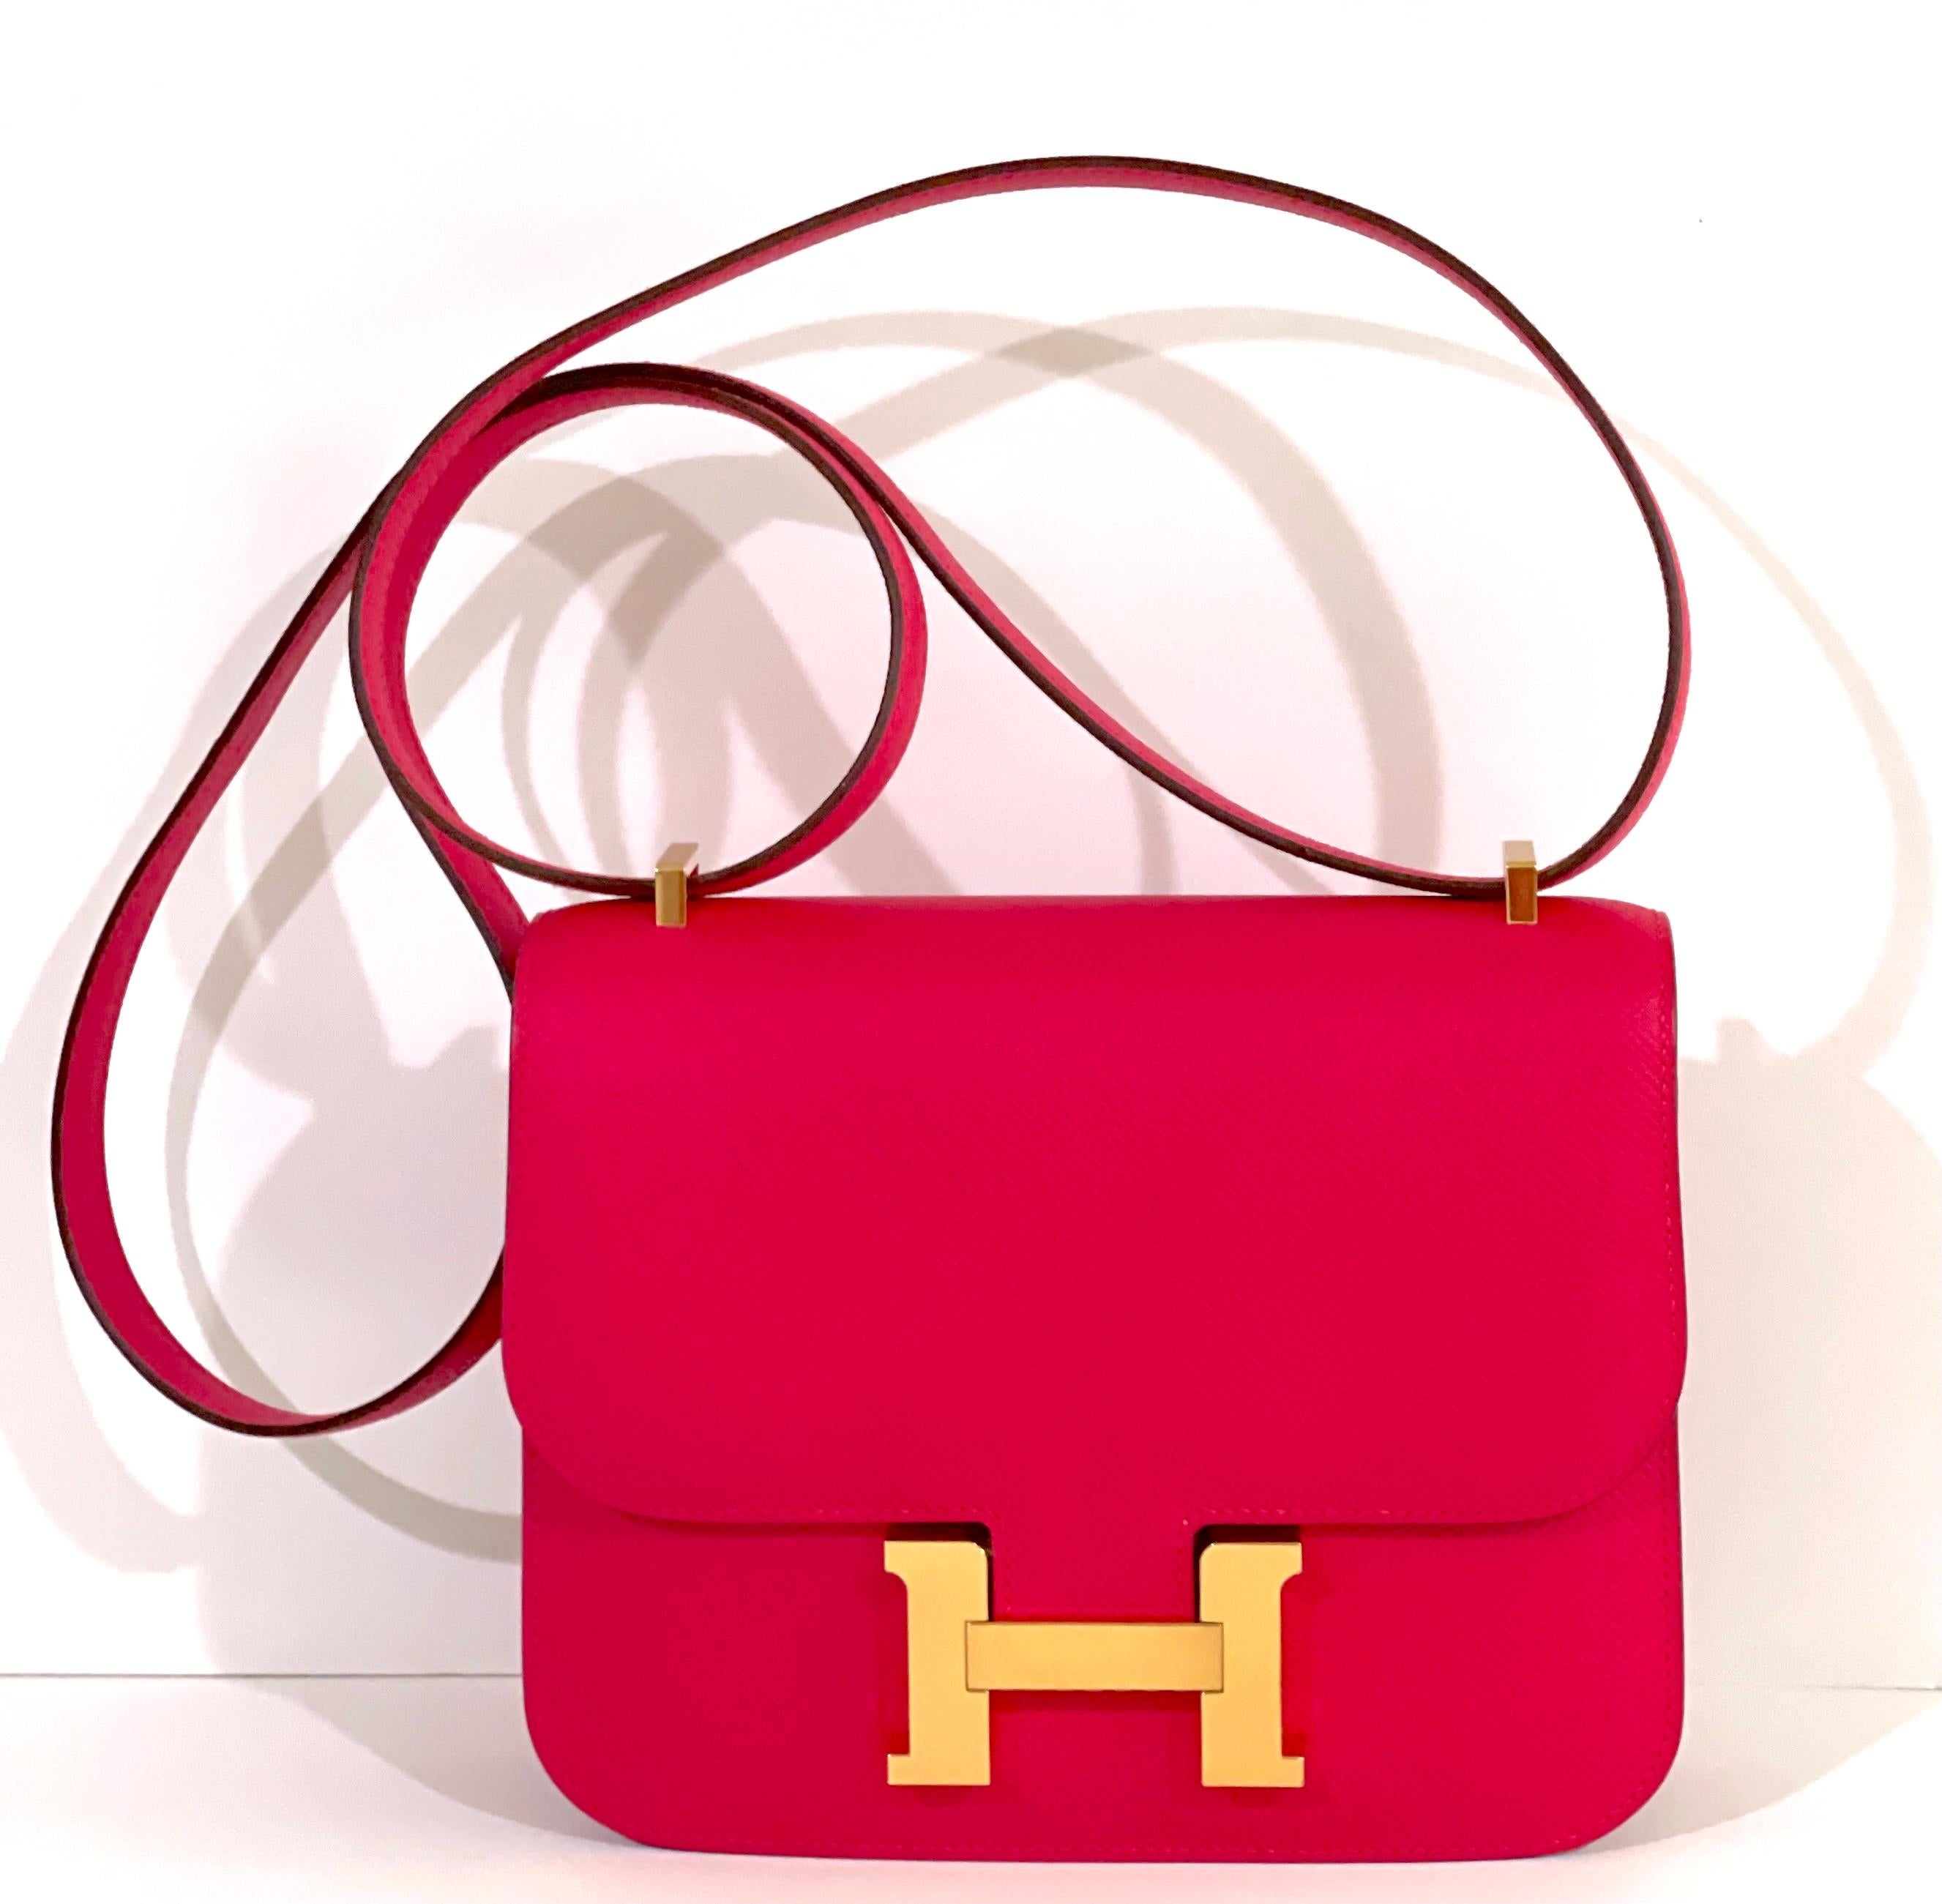 HERMES CONSTANCE BAG
Size 18cm
The mini size, the most popular size
Rose Extreme Epsom Leather
One of the newest colors, and highly collected
Gold Hardware
Brand new 
Plastic on the Hardware

COLLECTION Y
Storefresh




Comes ready for gift giving,